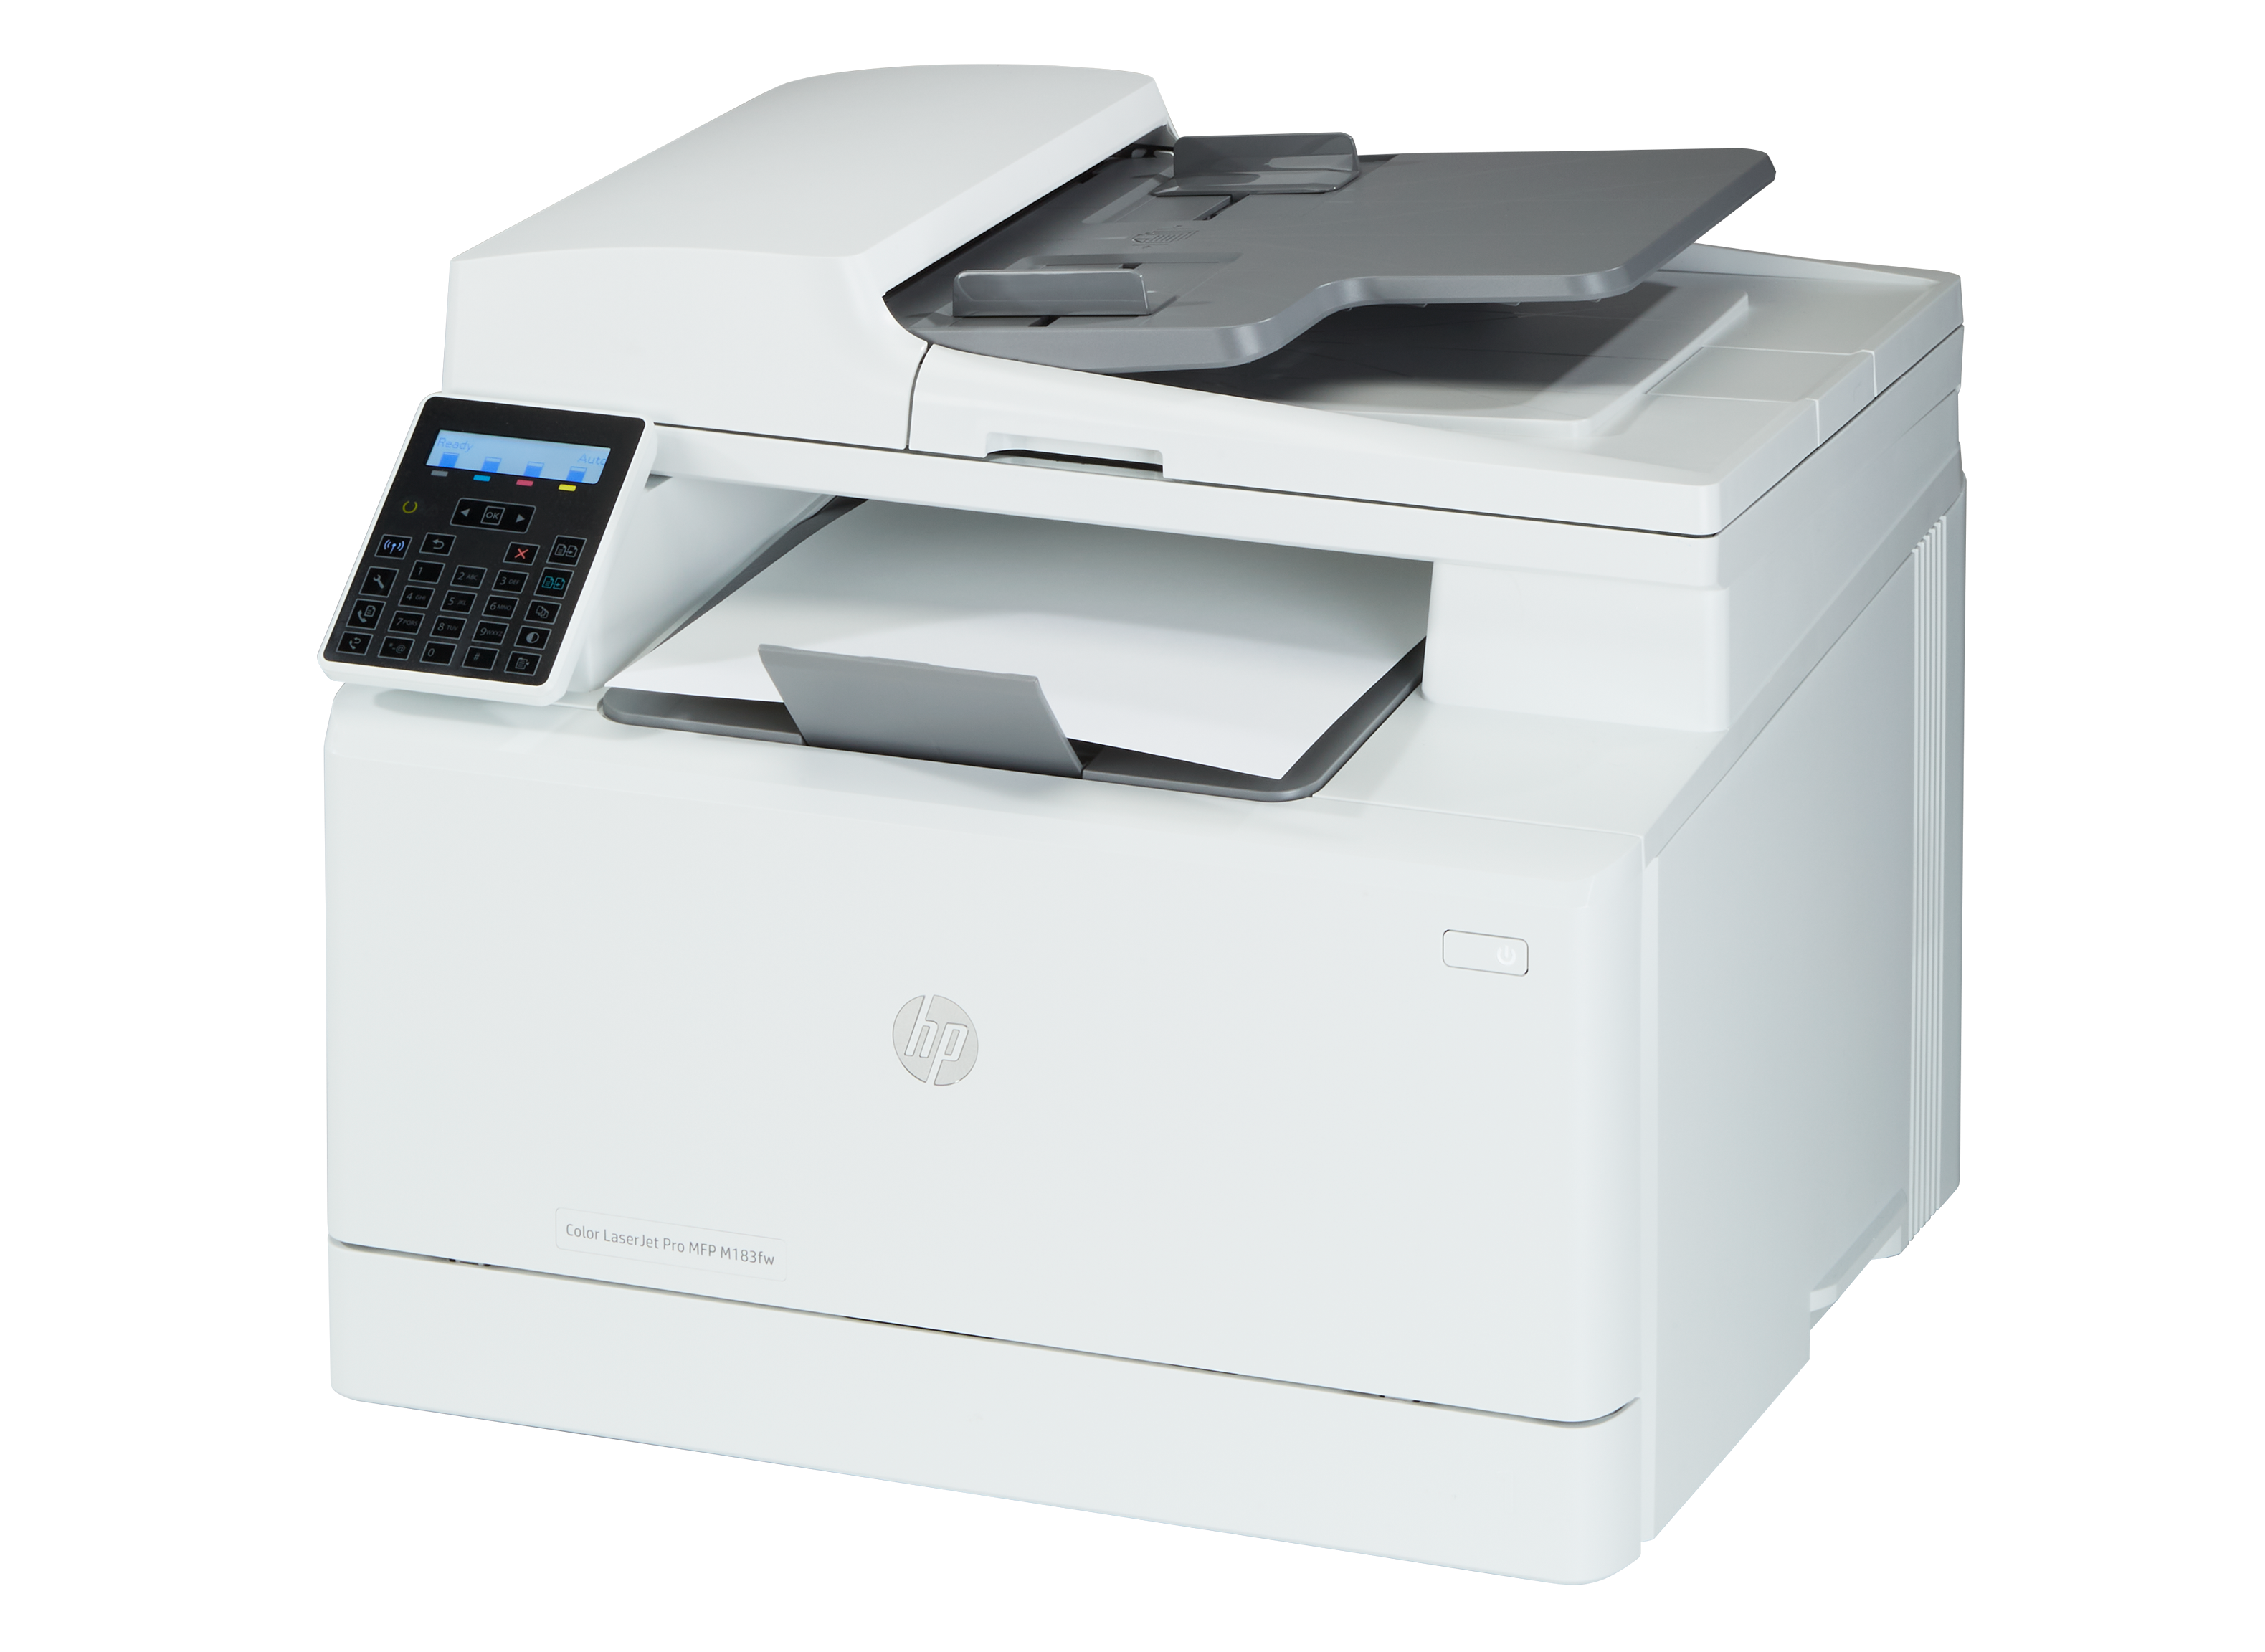 Brand New HP Color LaserJet Pro MFP M183fw All-in-One Color Printer  7KW56A#BGJ